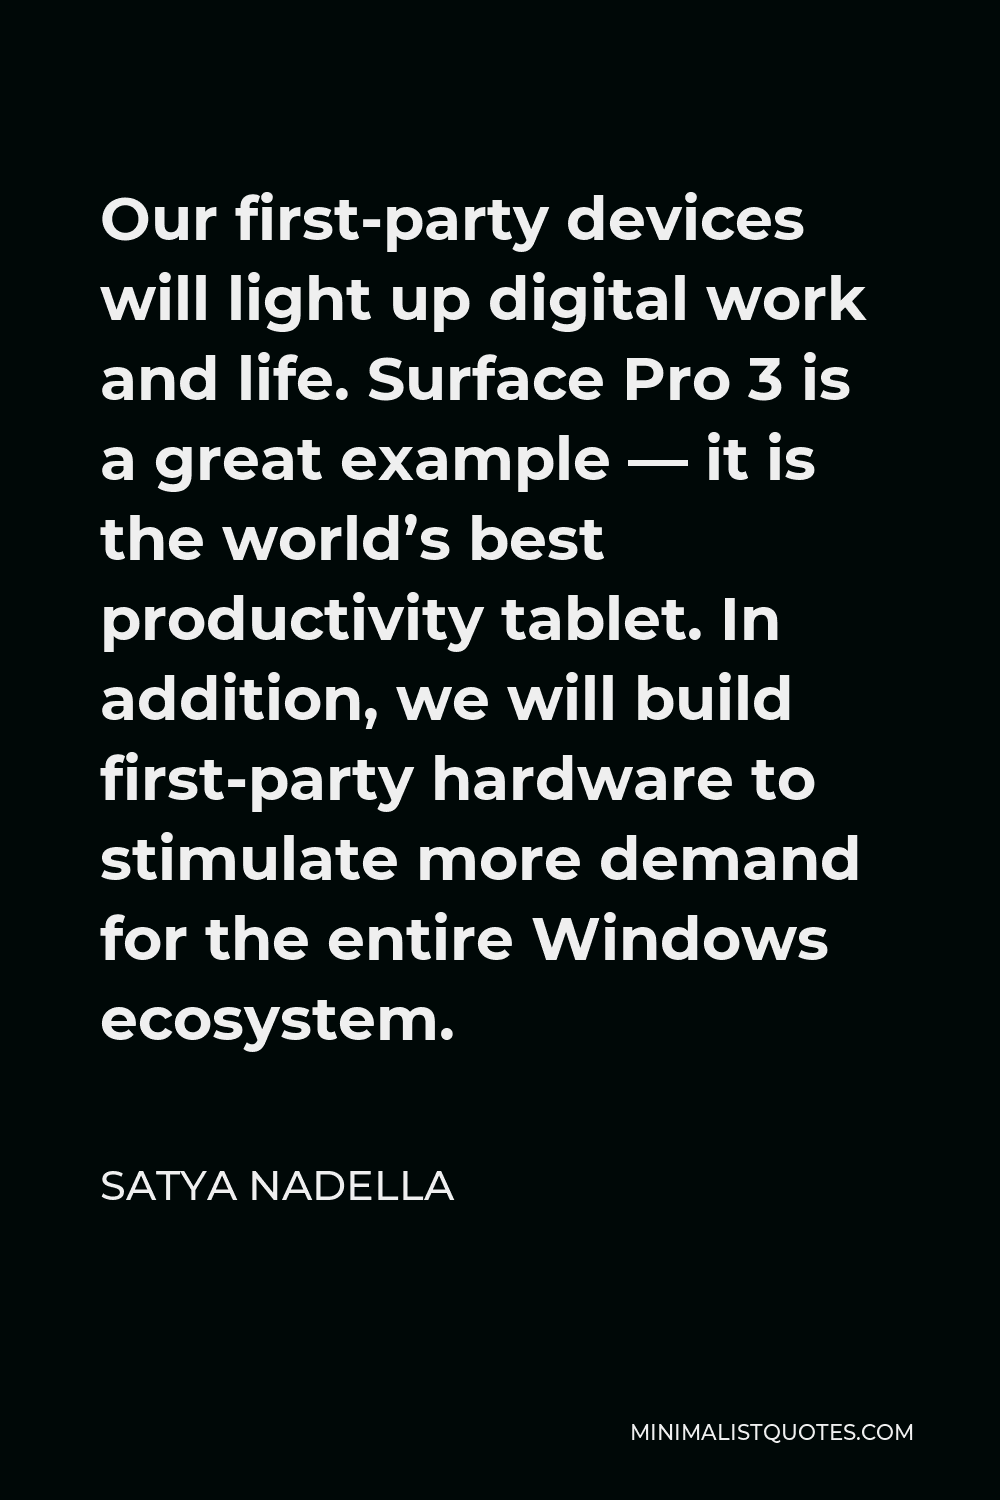 Satya Nadella Quote - Our first-party devices will light up digital work and life. Surface Pro 3 is a great example — it is the world’s best productivity tablet. In addition, we will build first-party hardware to stimulate more demand for the entire Windows ecosystem.